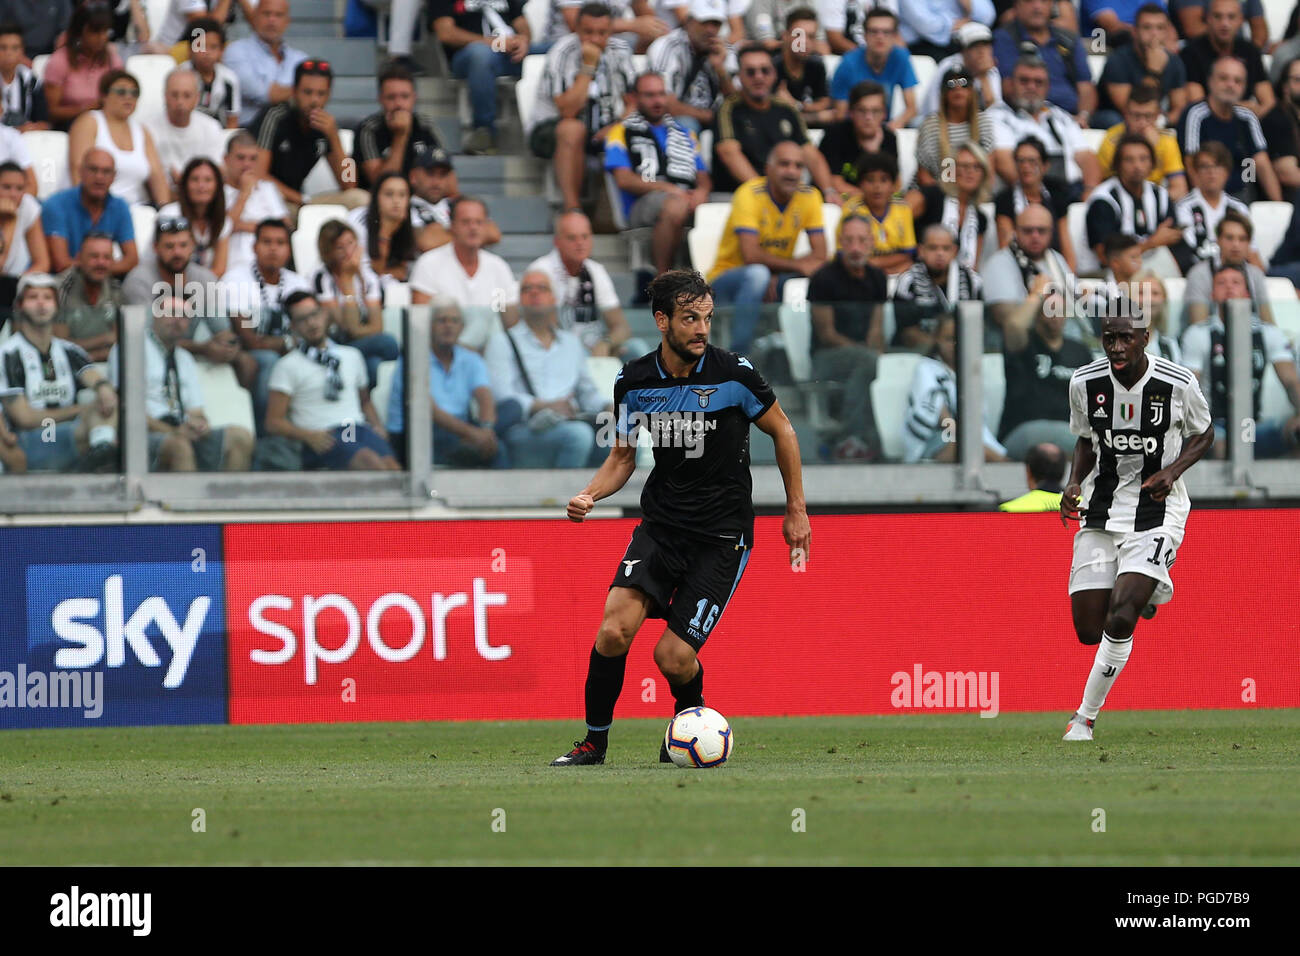 Torino, Italy. 25th August, 2018. Marco Parolo  of SS Lazio in action during the Serie A football match between Juventus Fc and SS Lazio.  Credit: Marco Canoniero / Alamy Live News  . Credit: Marco Canoniero/Alamy Live News Stock Photo